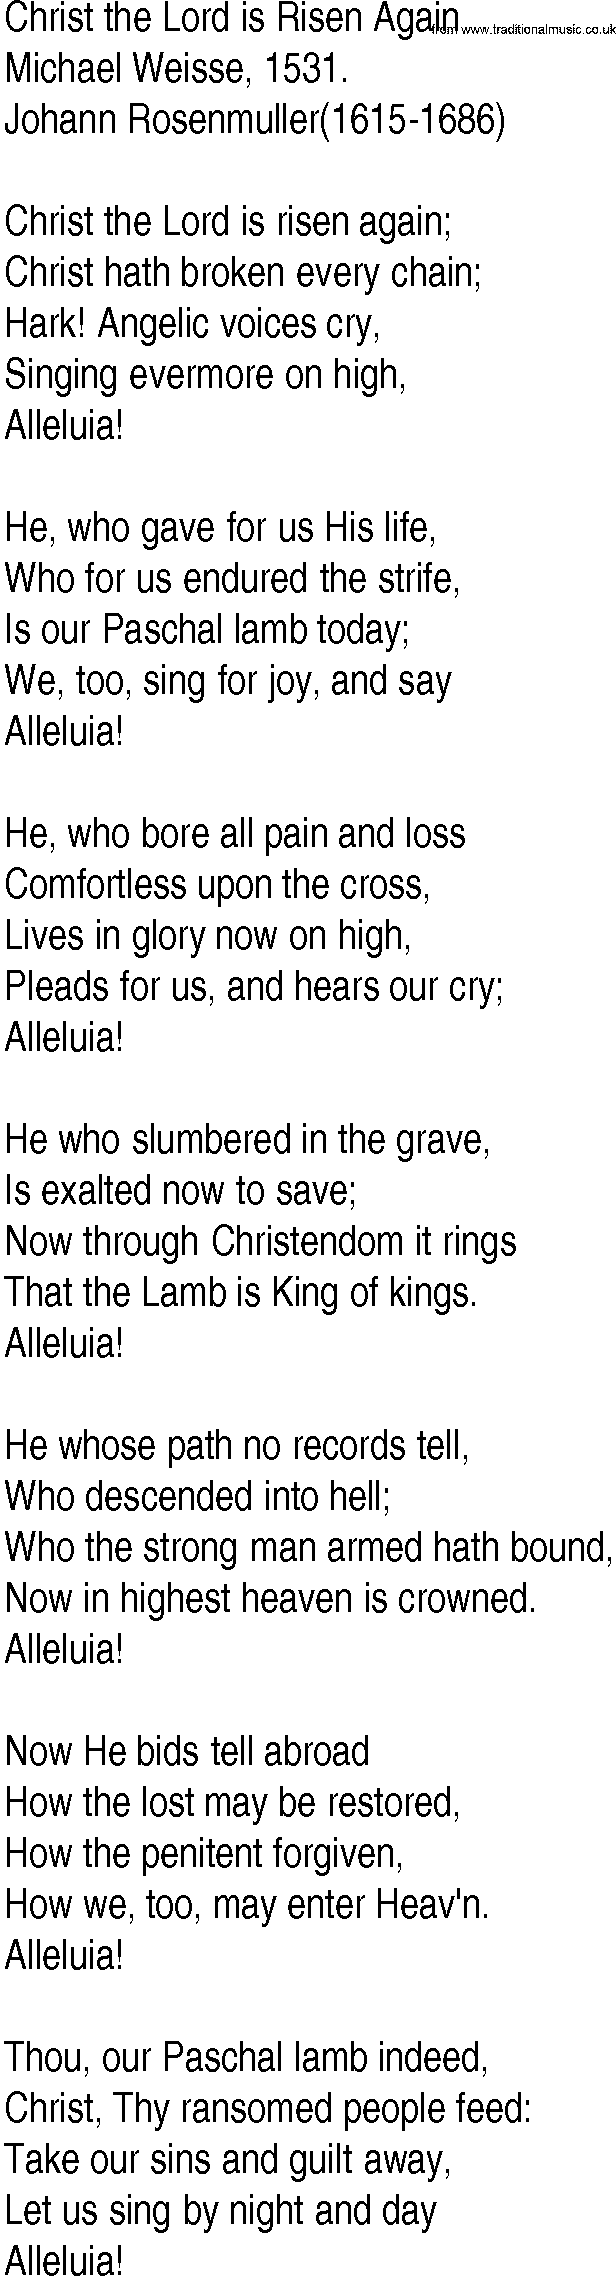 Hymn and Gospel Song: Christ the Lord is Risen Again by Michael Weisse lyrics